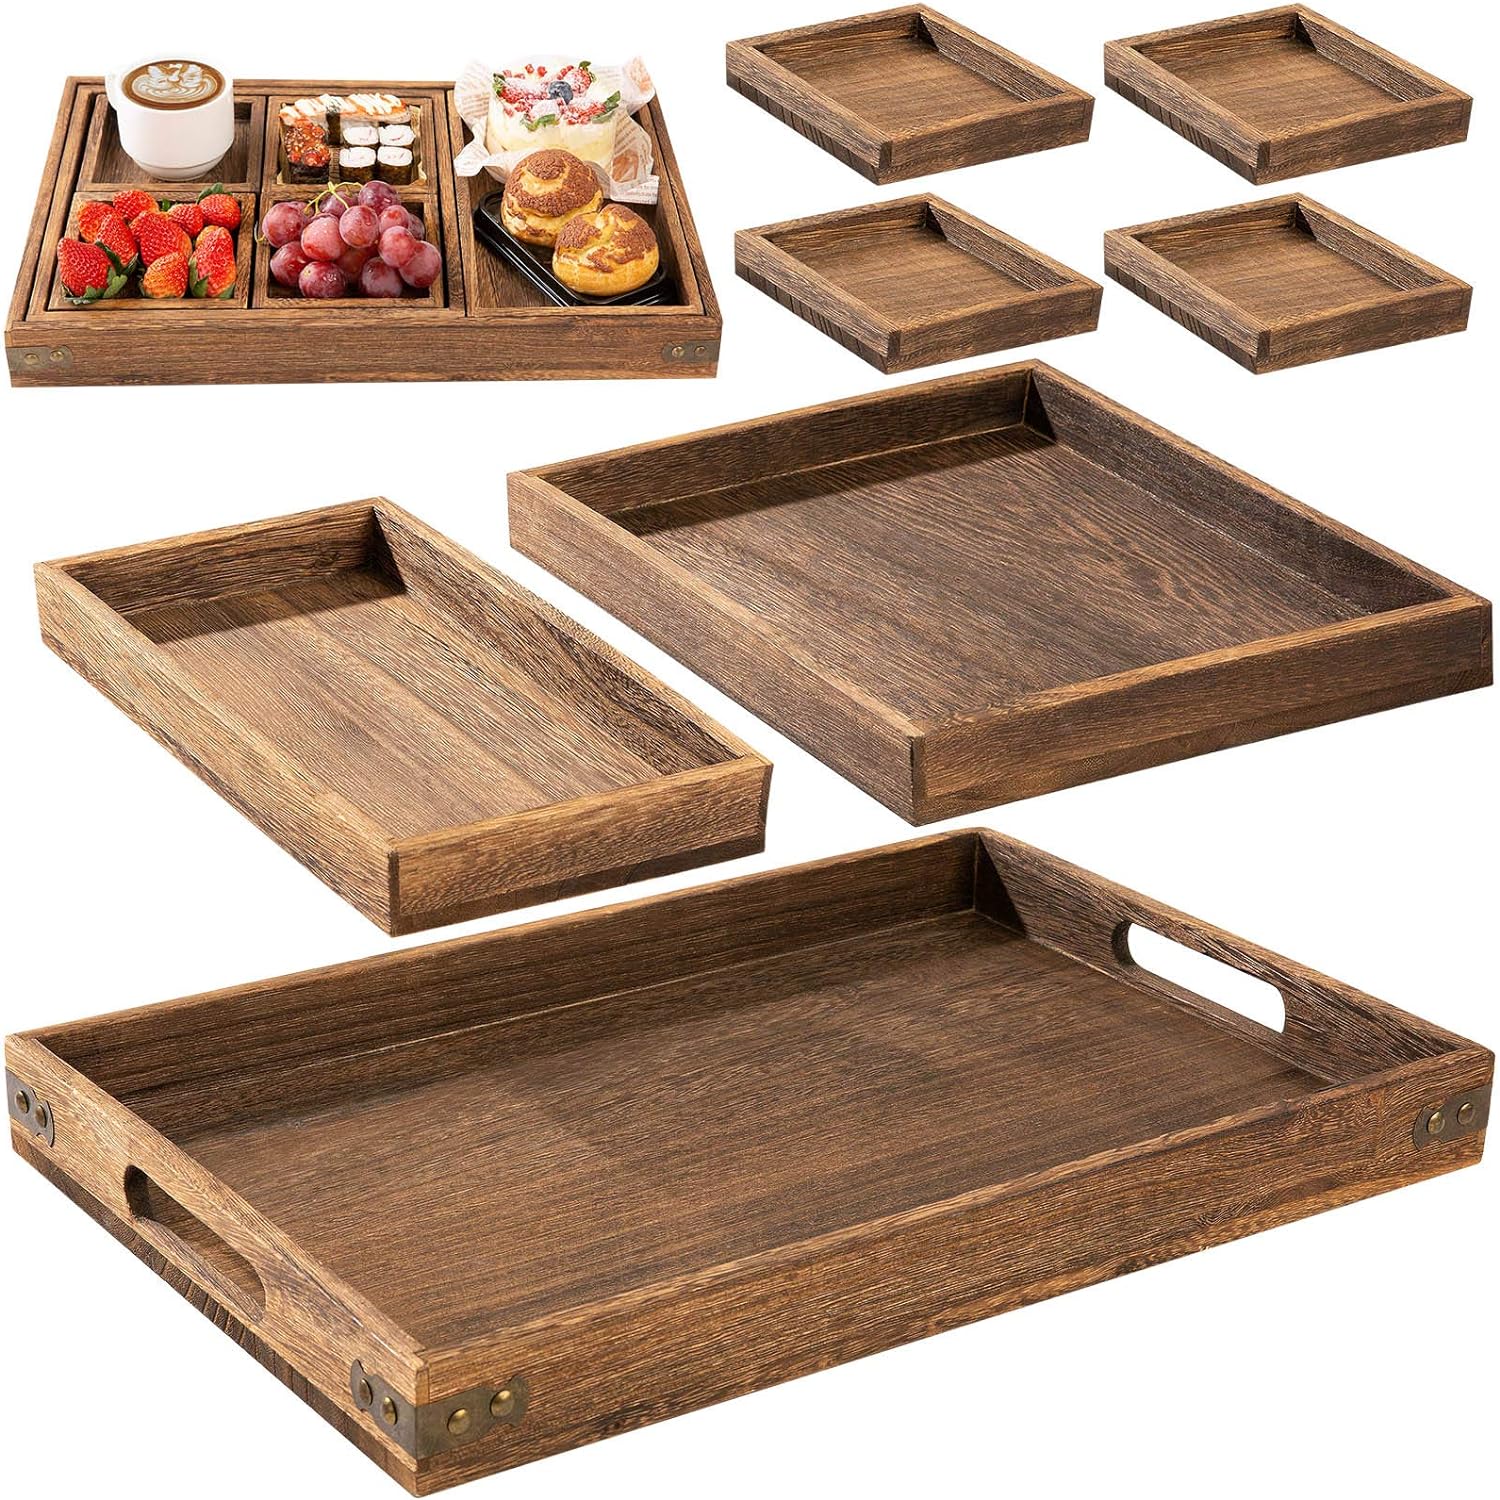 Yangbaga Rustic Wooden Serving Trays with Handle